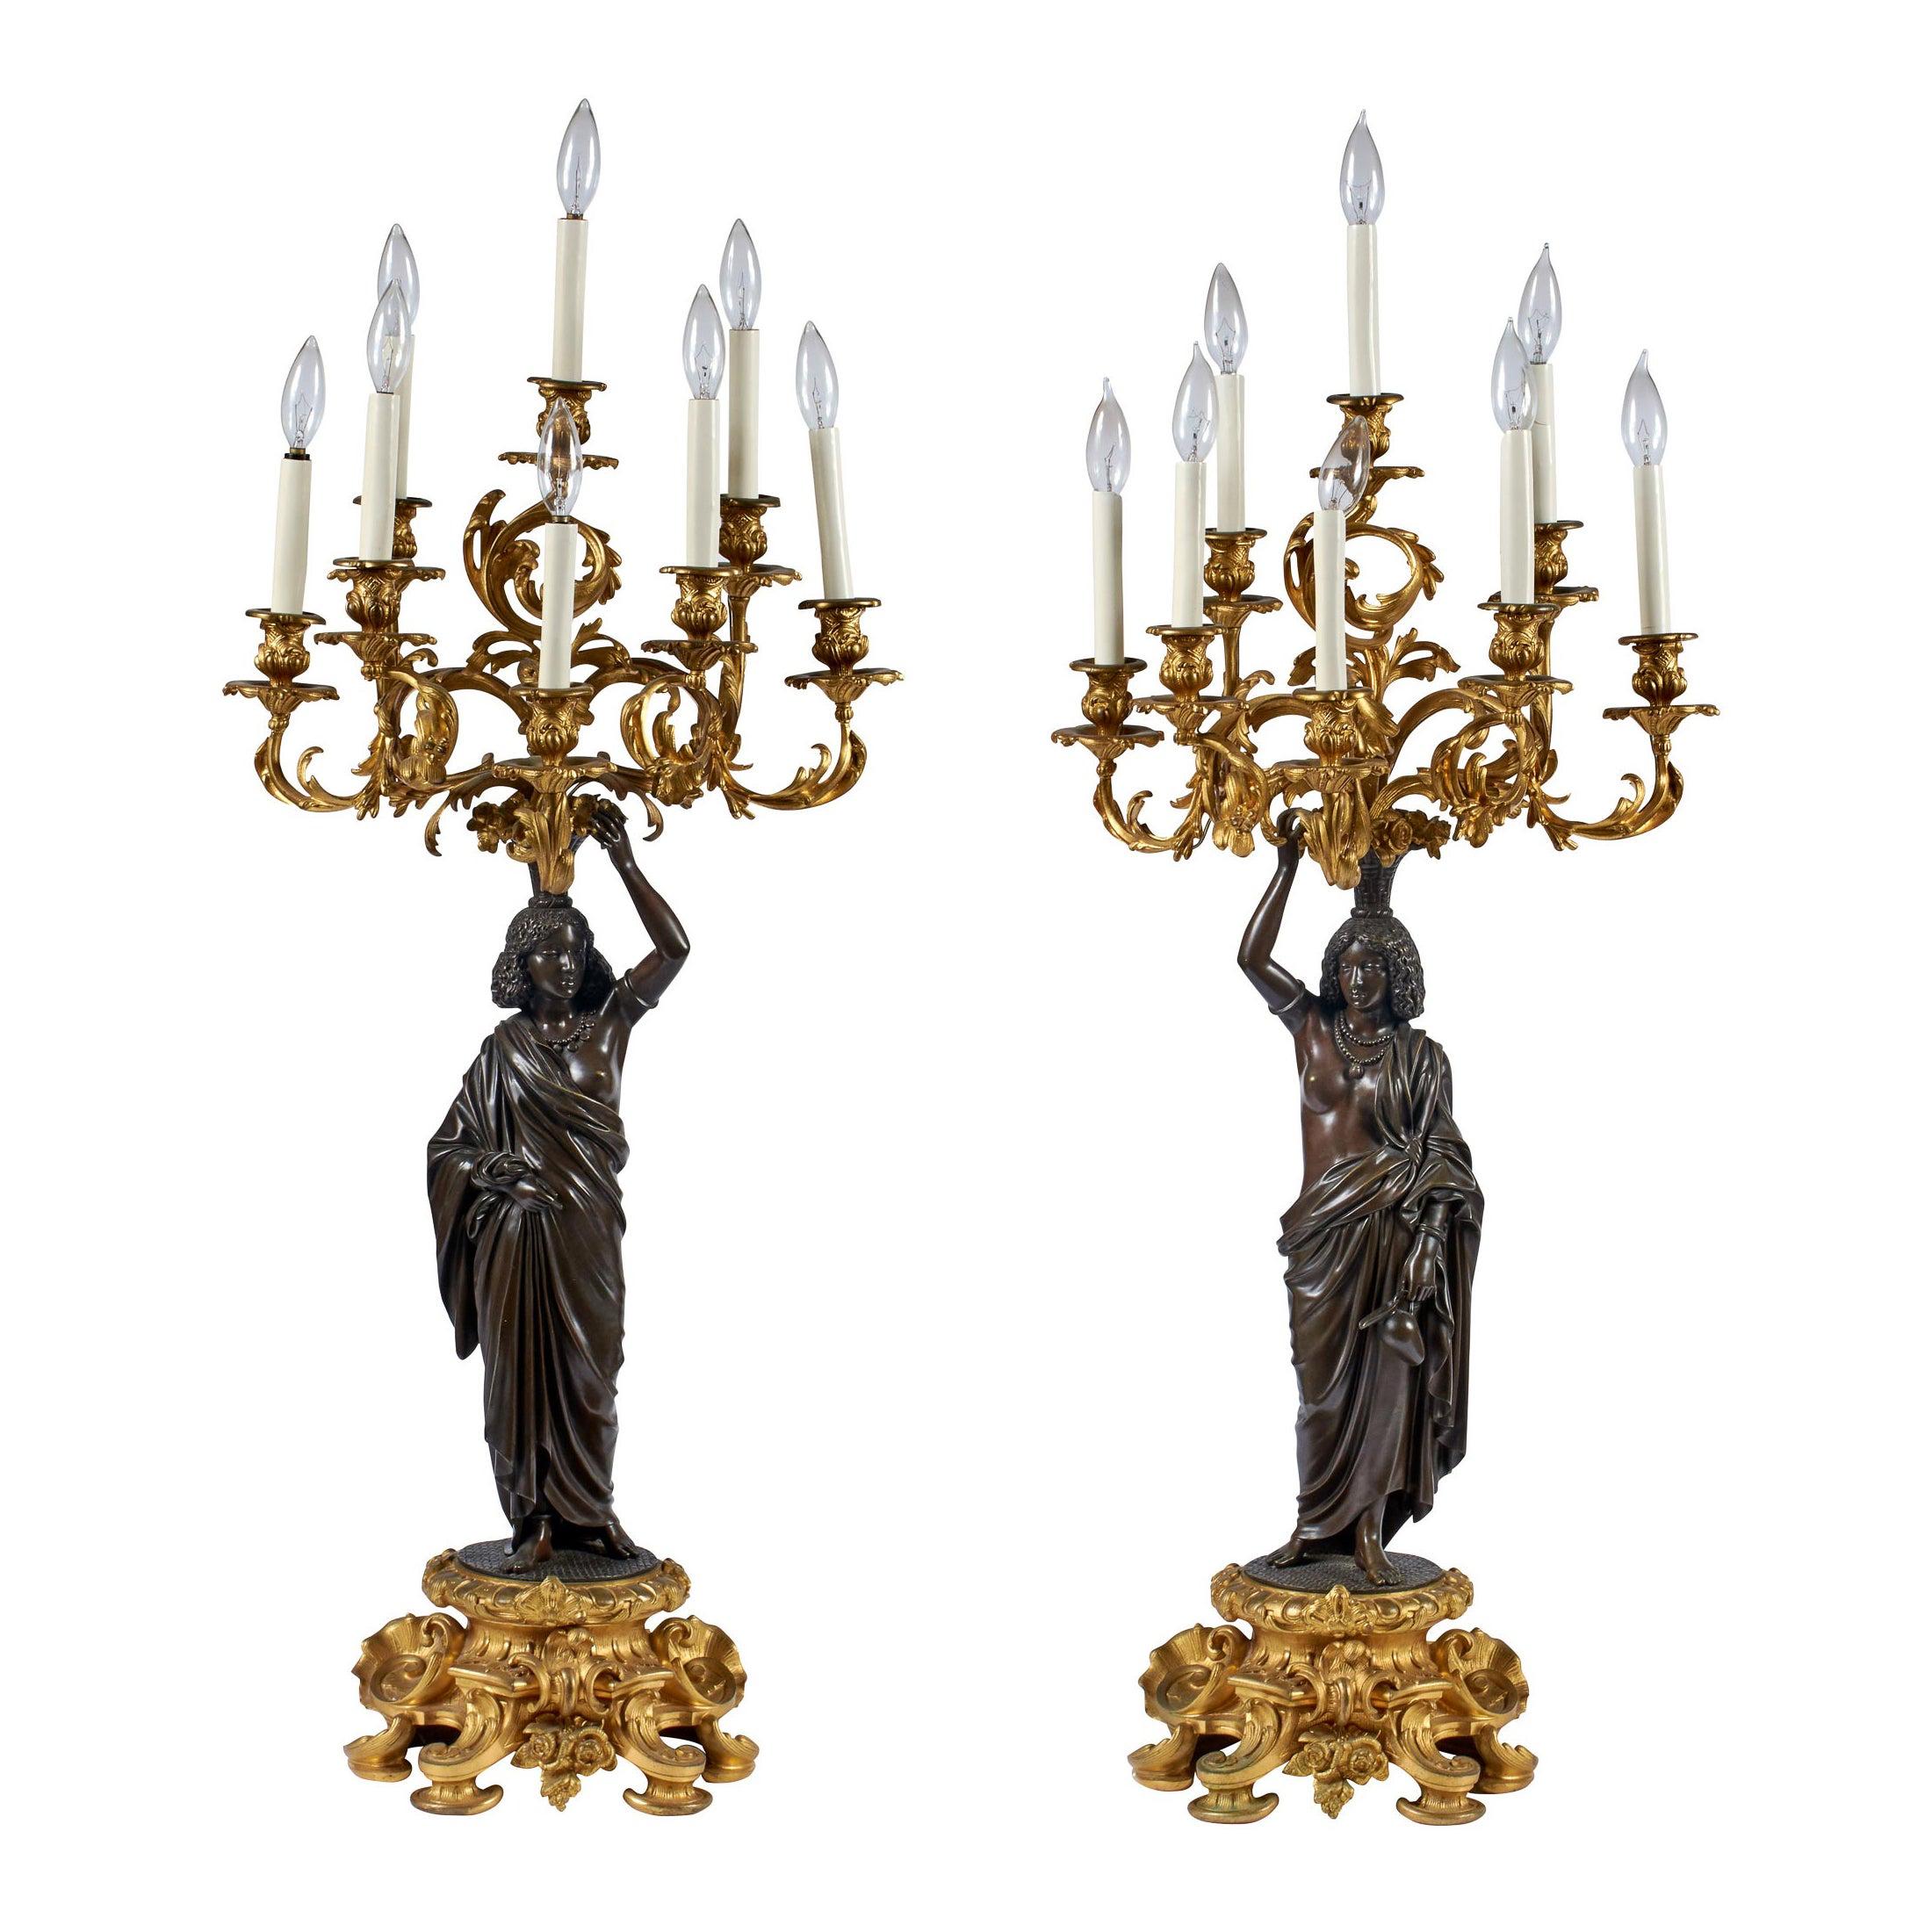 Pair of Ormolu and Patinated Bronze Figural Eight-Light Candelabras For Sale